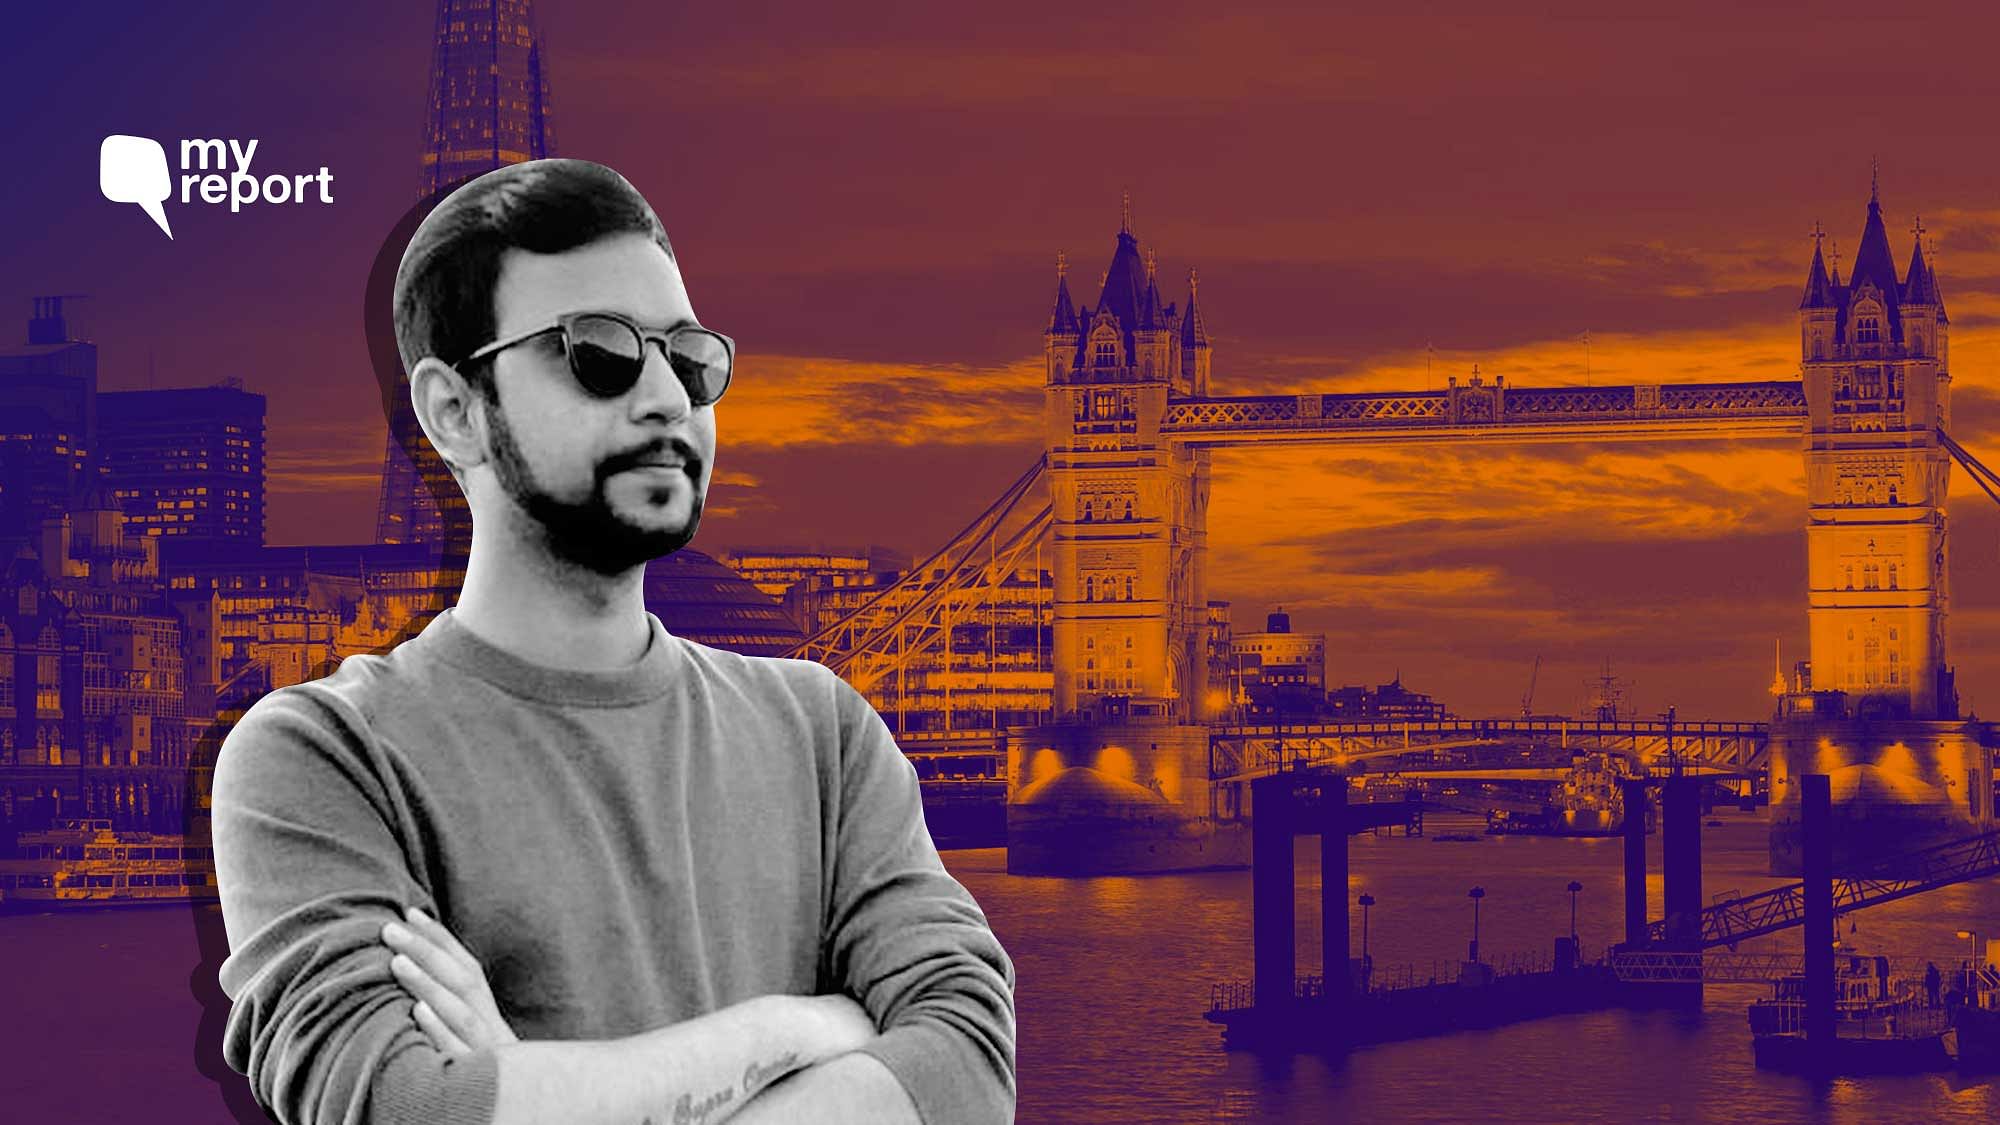 An international student studying in London chronicles his journey back home.